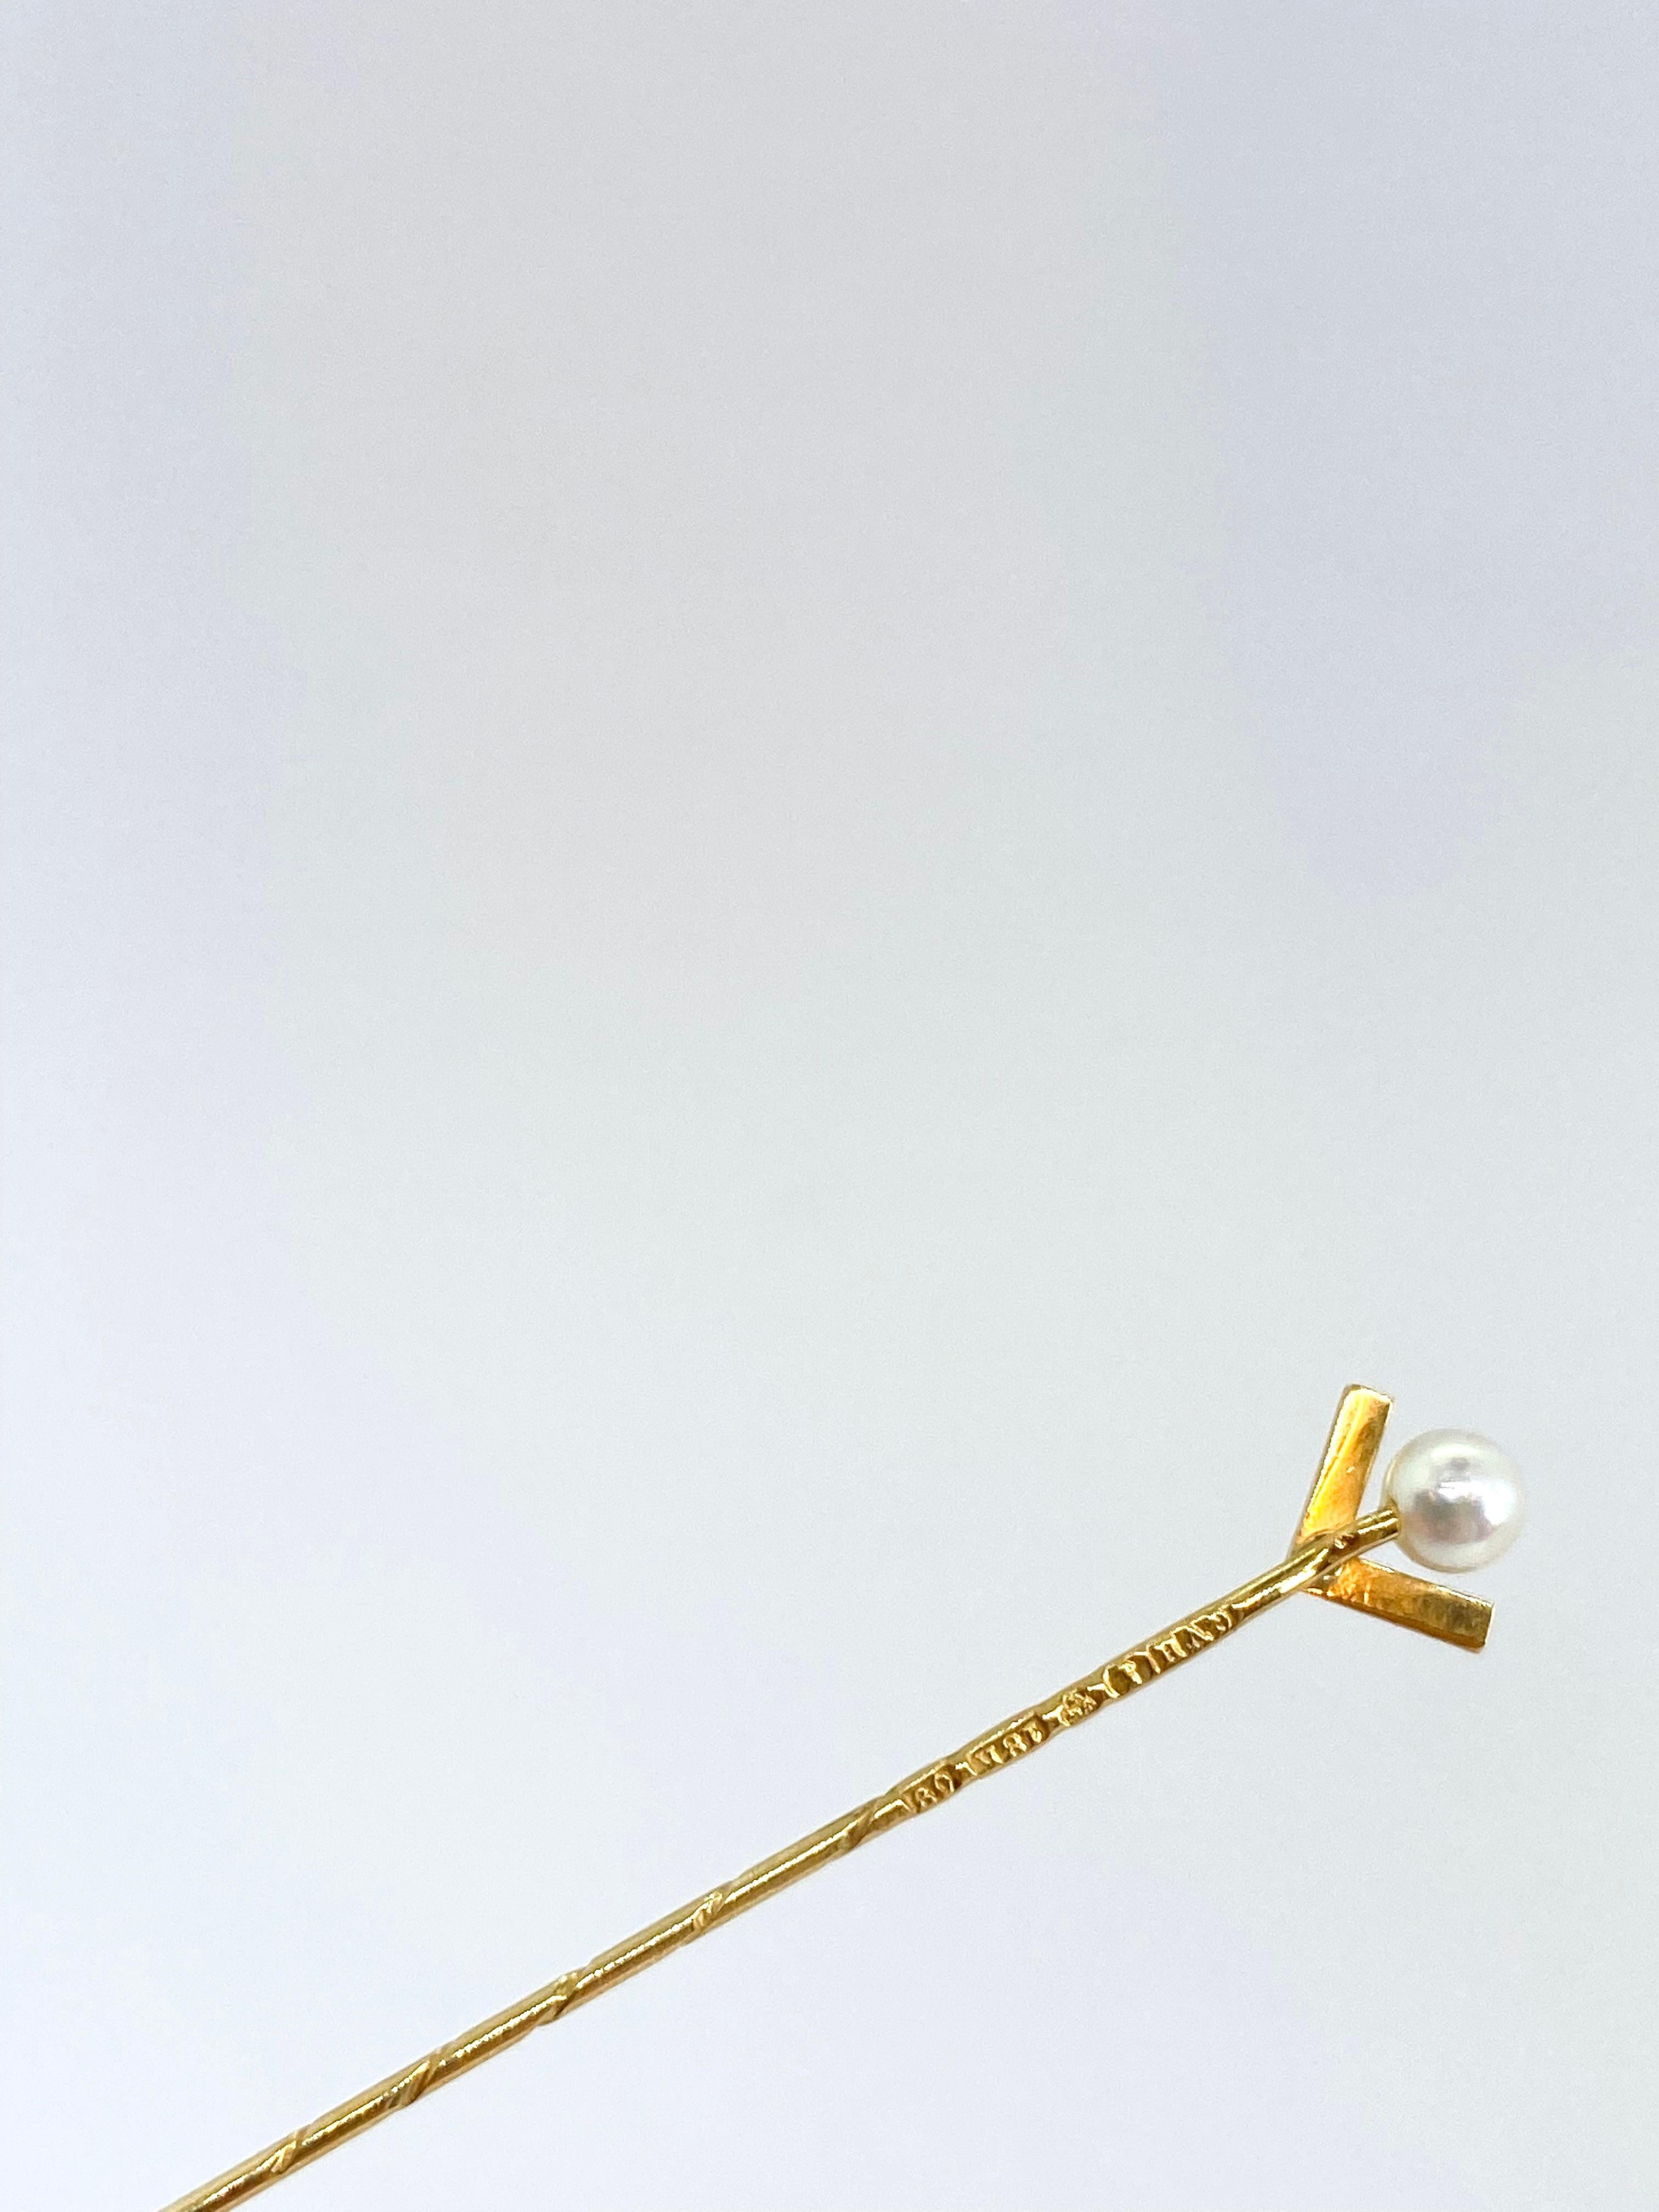 18 Karat Gold Stickpin and Pearl
Made in Sweden.
Stamp GVH, O9, 18K, Three Crowns